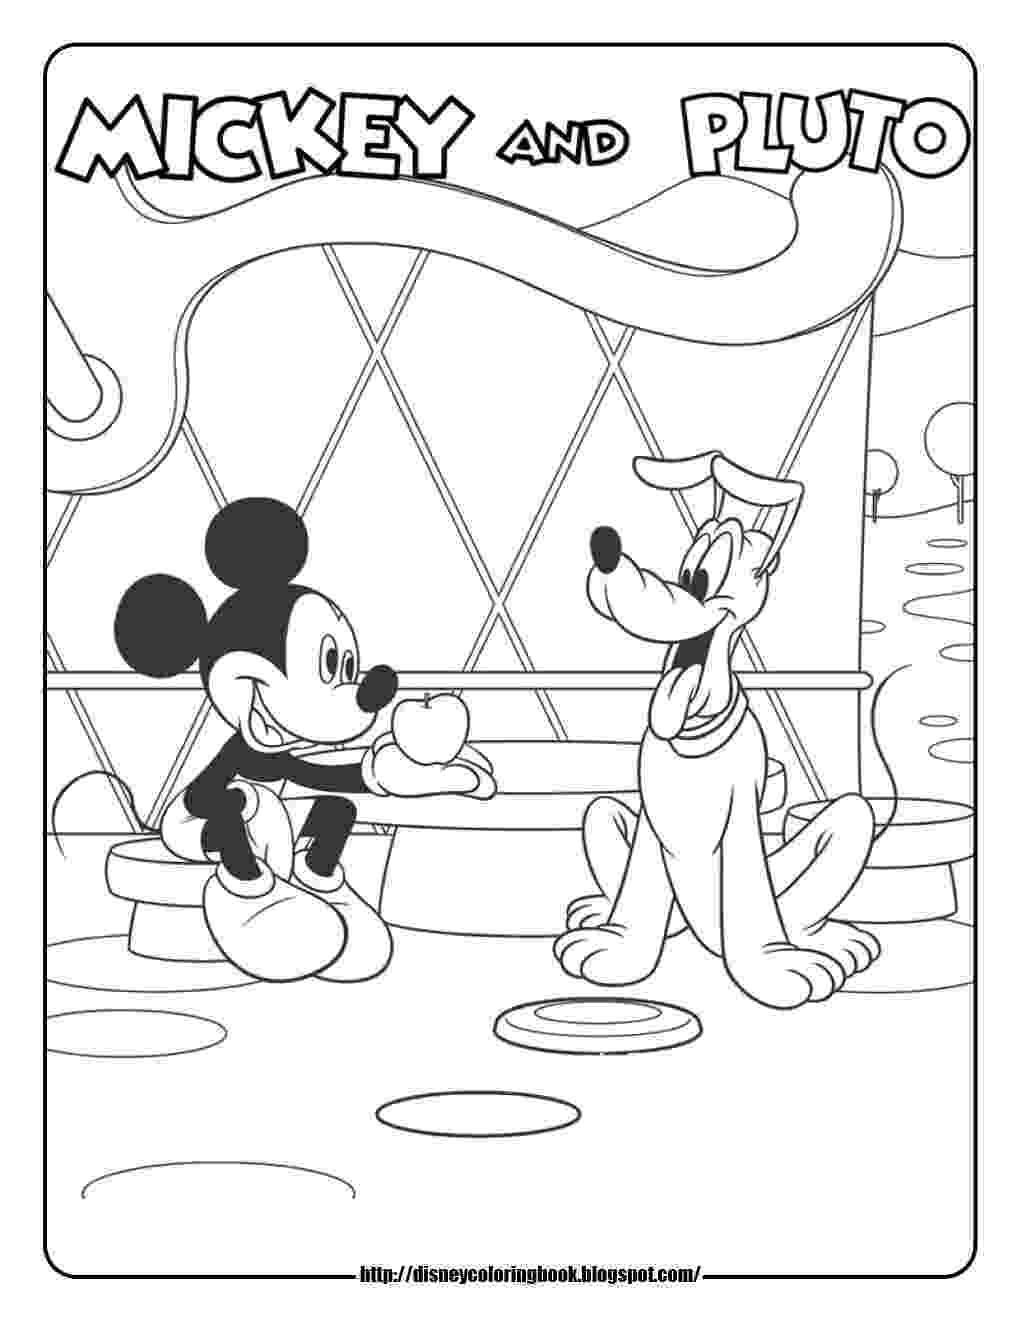 mickey mouse clubhouse coloring page mickey mouse clubhouse 1 free disney coloring sheets mouse clubhouse page mickey coloring 